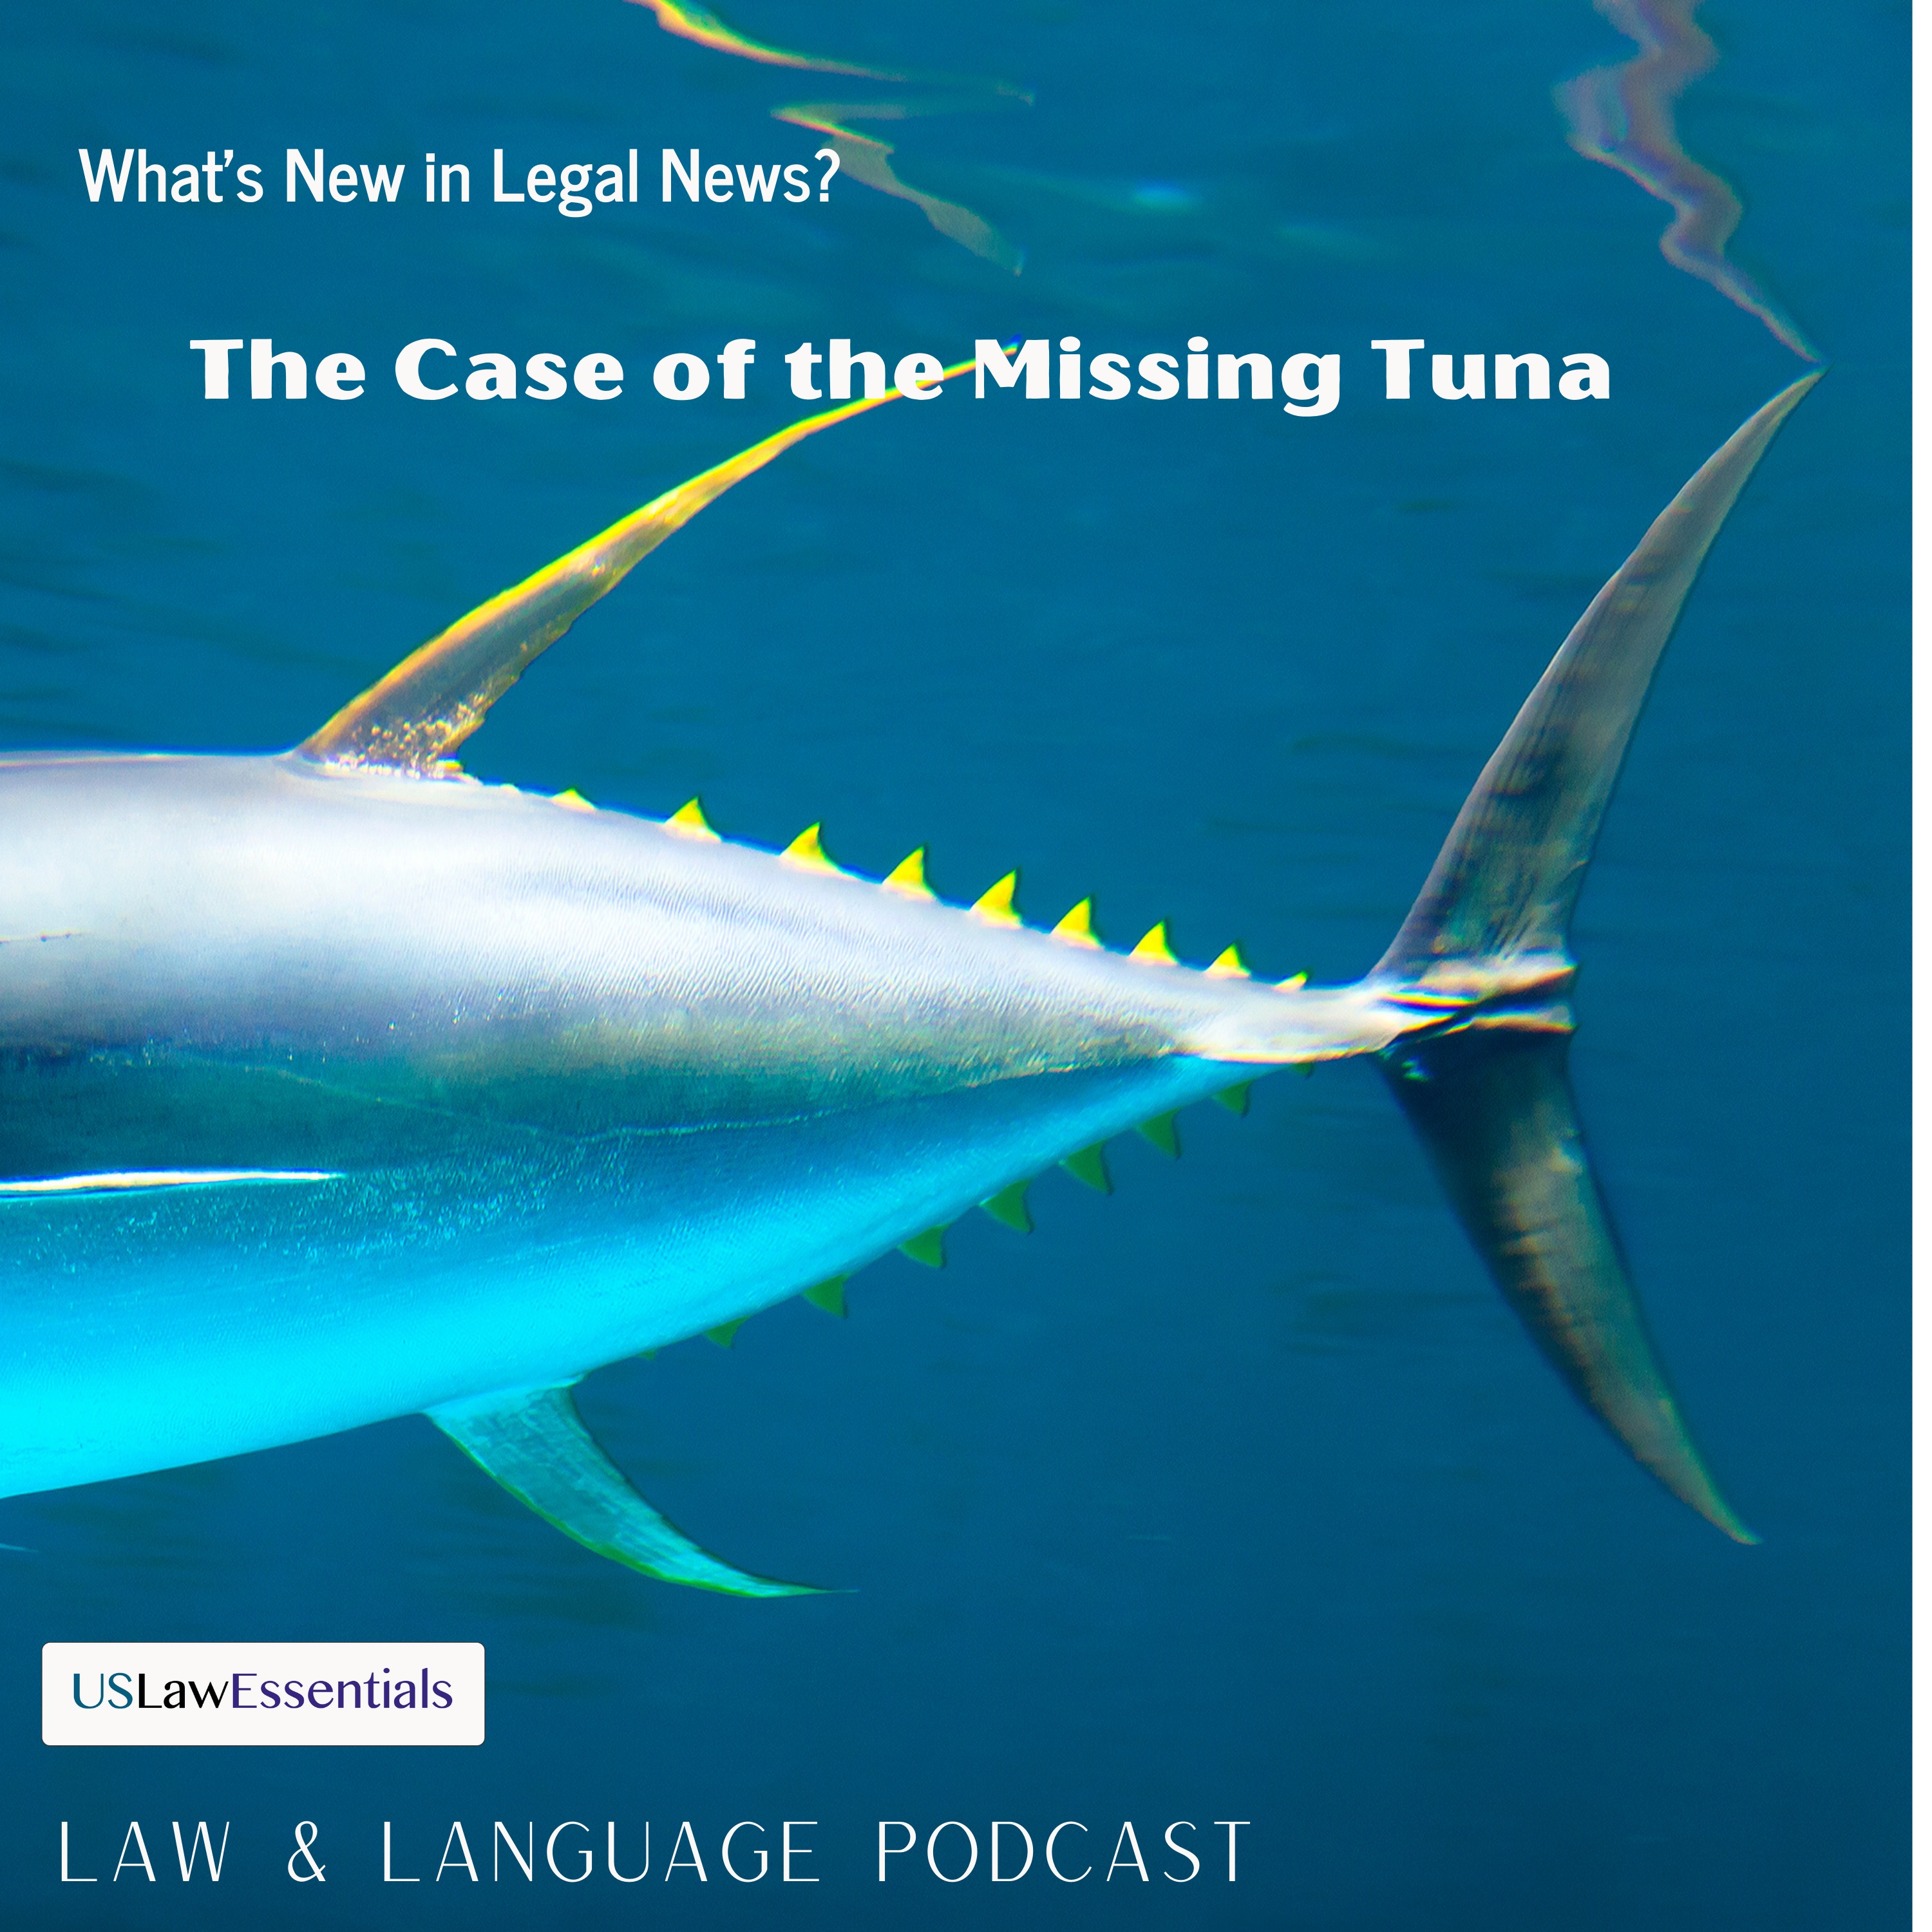 The Case of the Missing Tuna